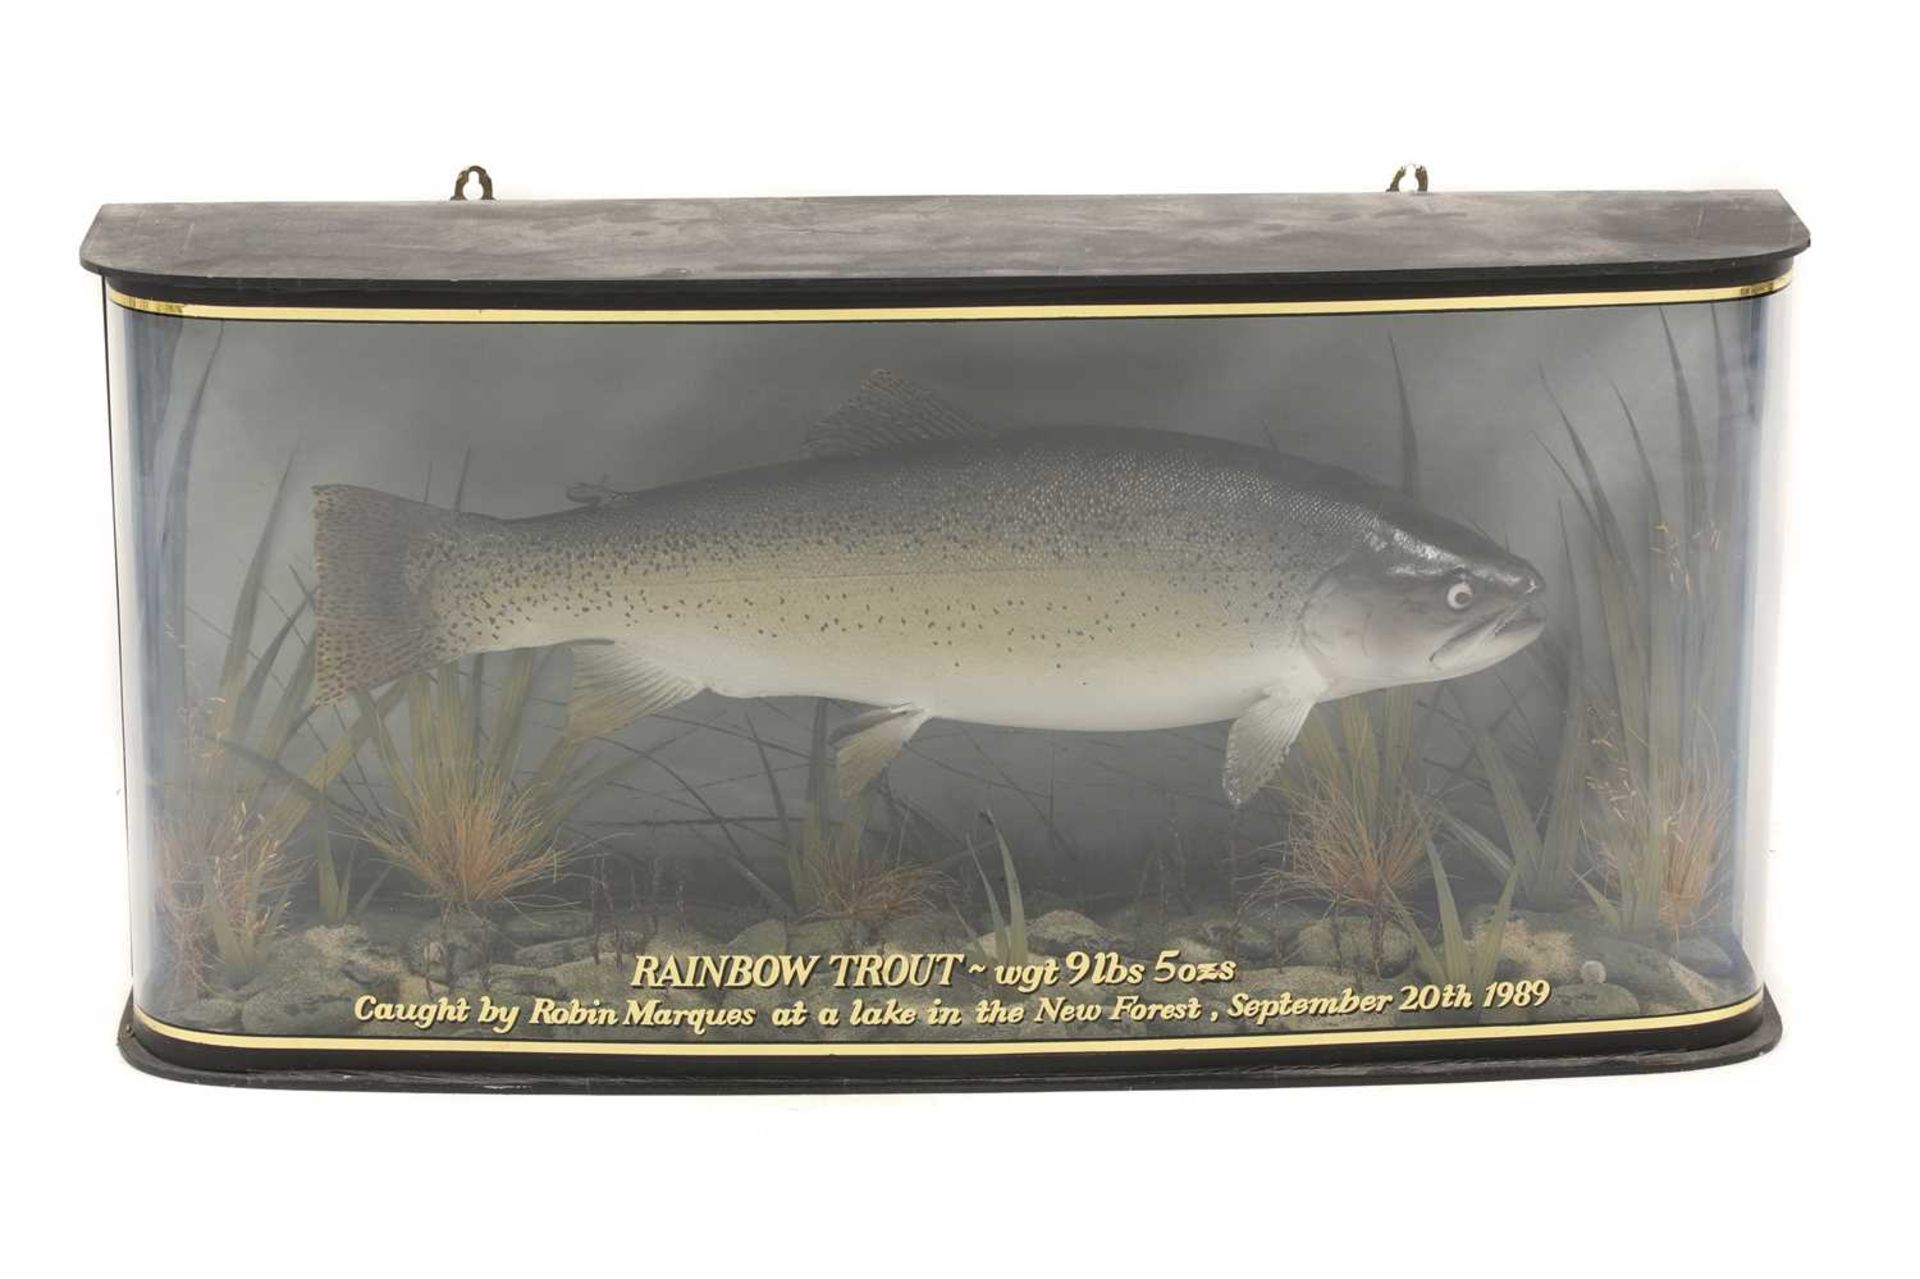 Taxidermy: A large rainbow trout